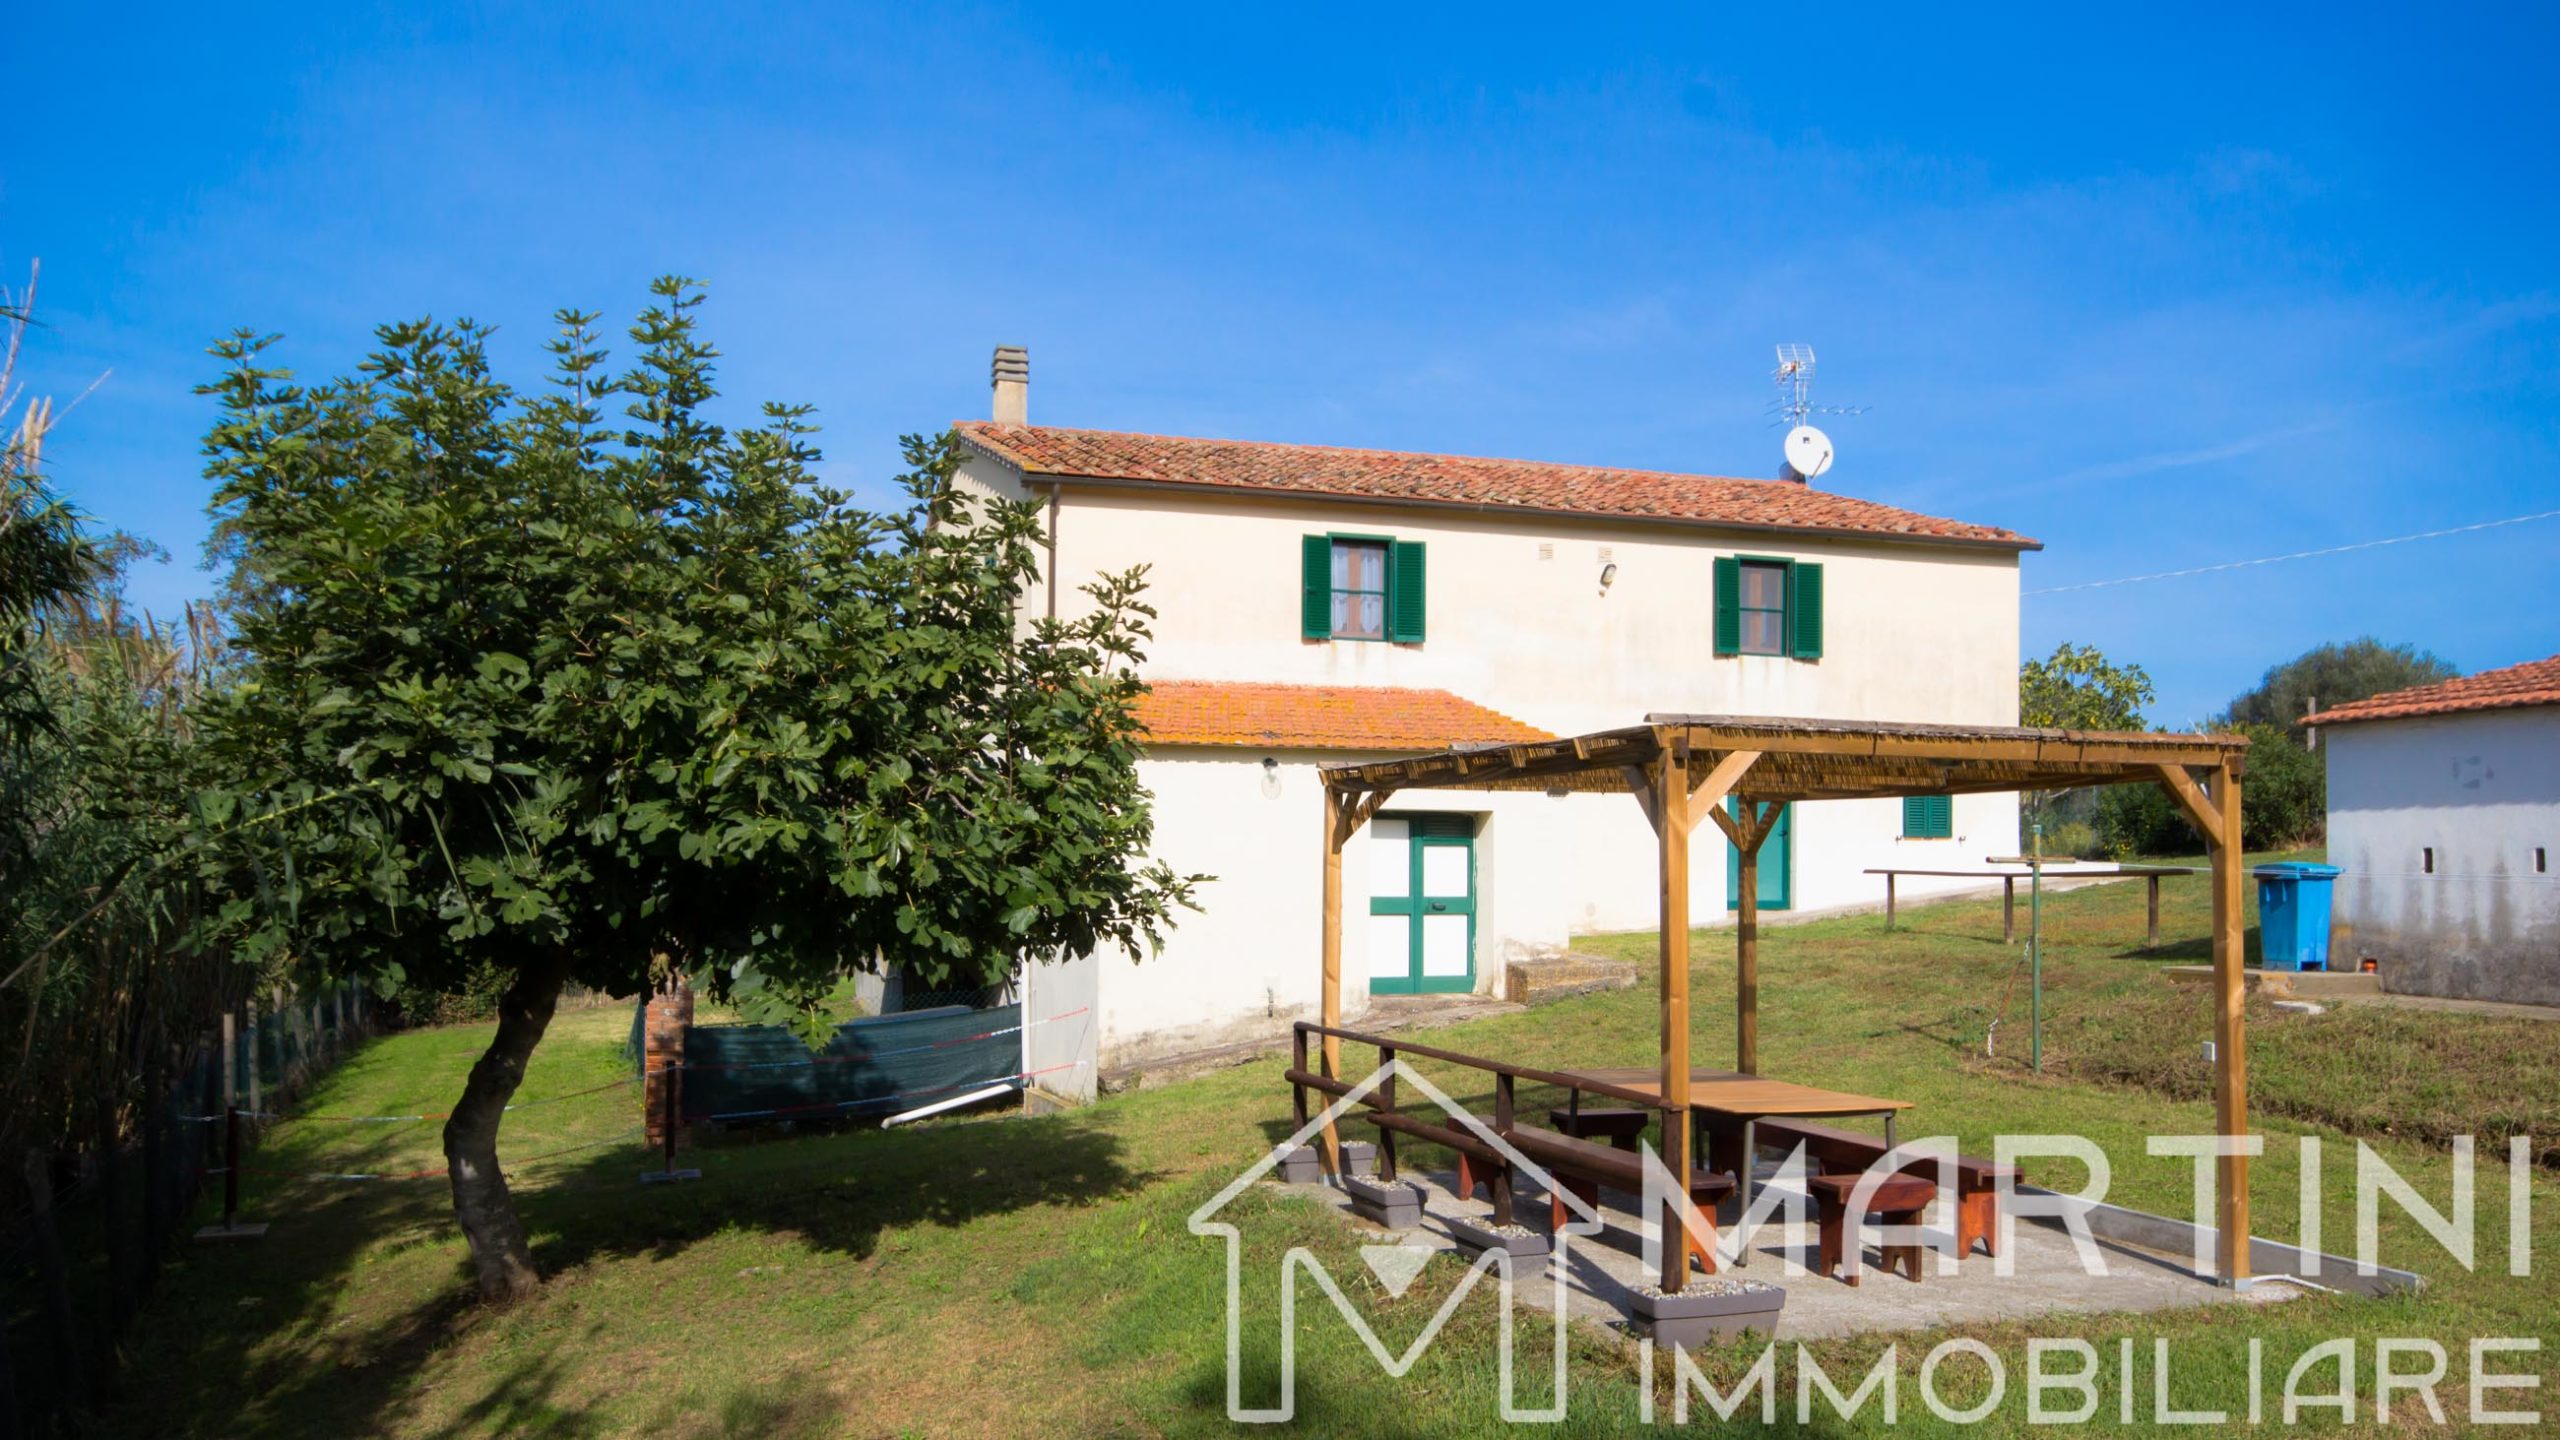 Country House to Rent with Garden | Tuscany Holiday